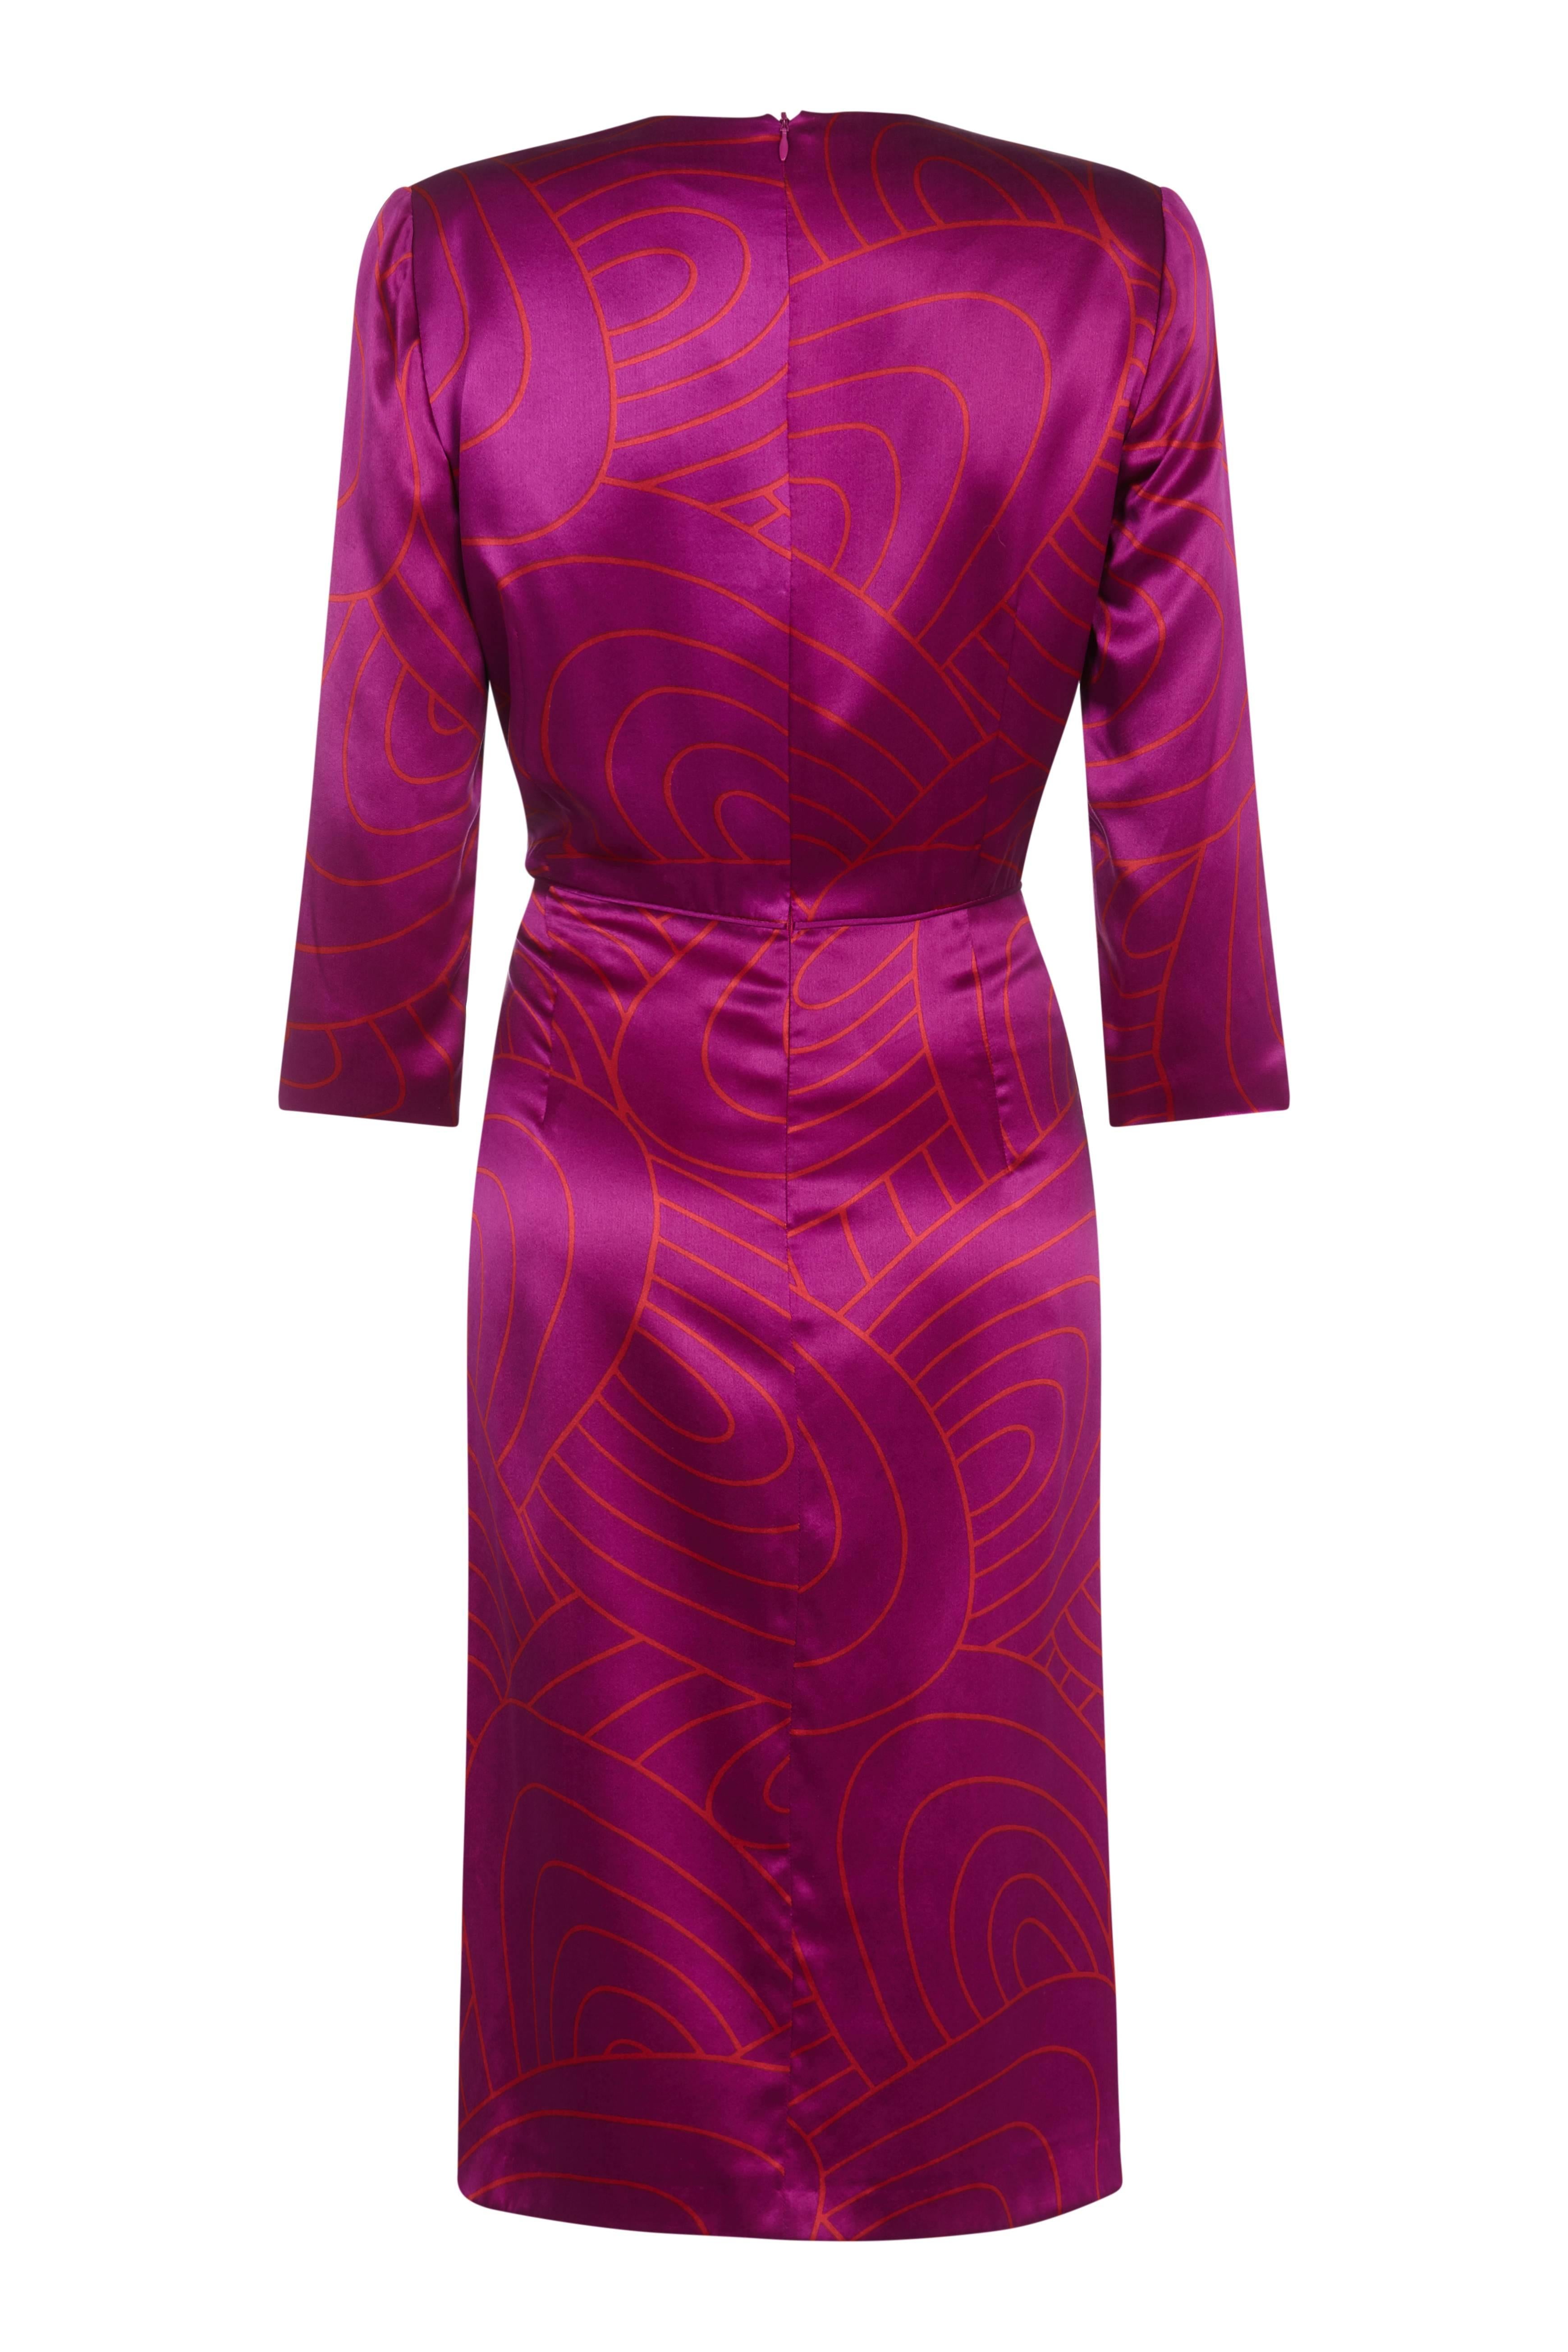 This seductive 1990s Louis Feraud hot pink silk dress with wrap around detail is  sure to turn heads at the next party. The alluring shade of pink is enhanced by the 60s style swirling design in warm orange which has a wonderful interplay over the